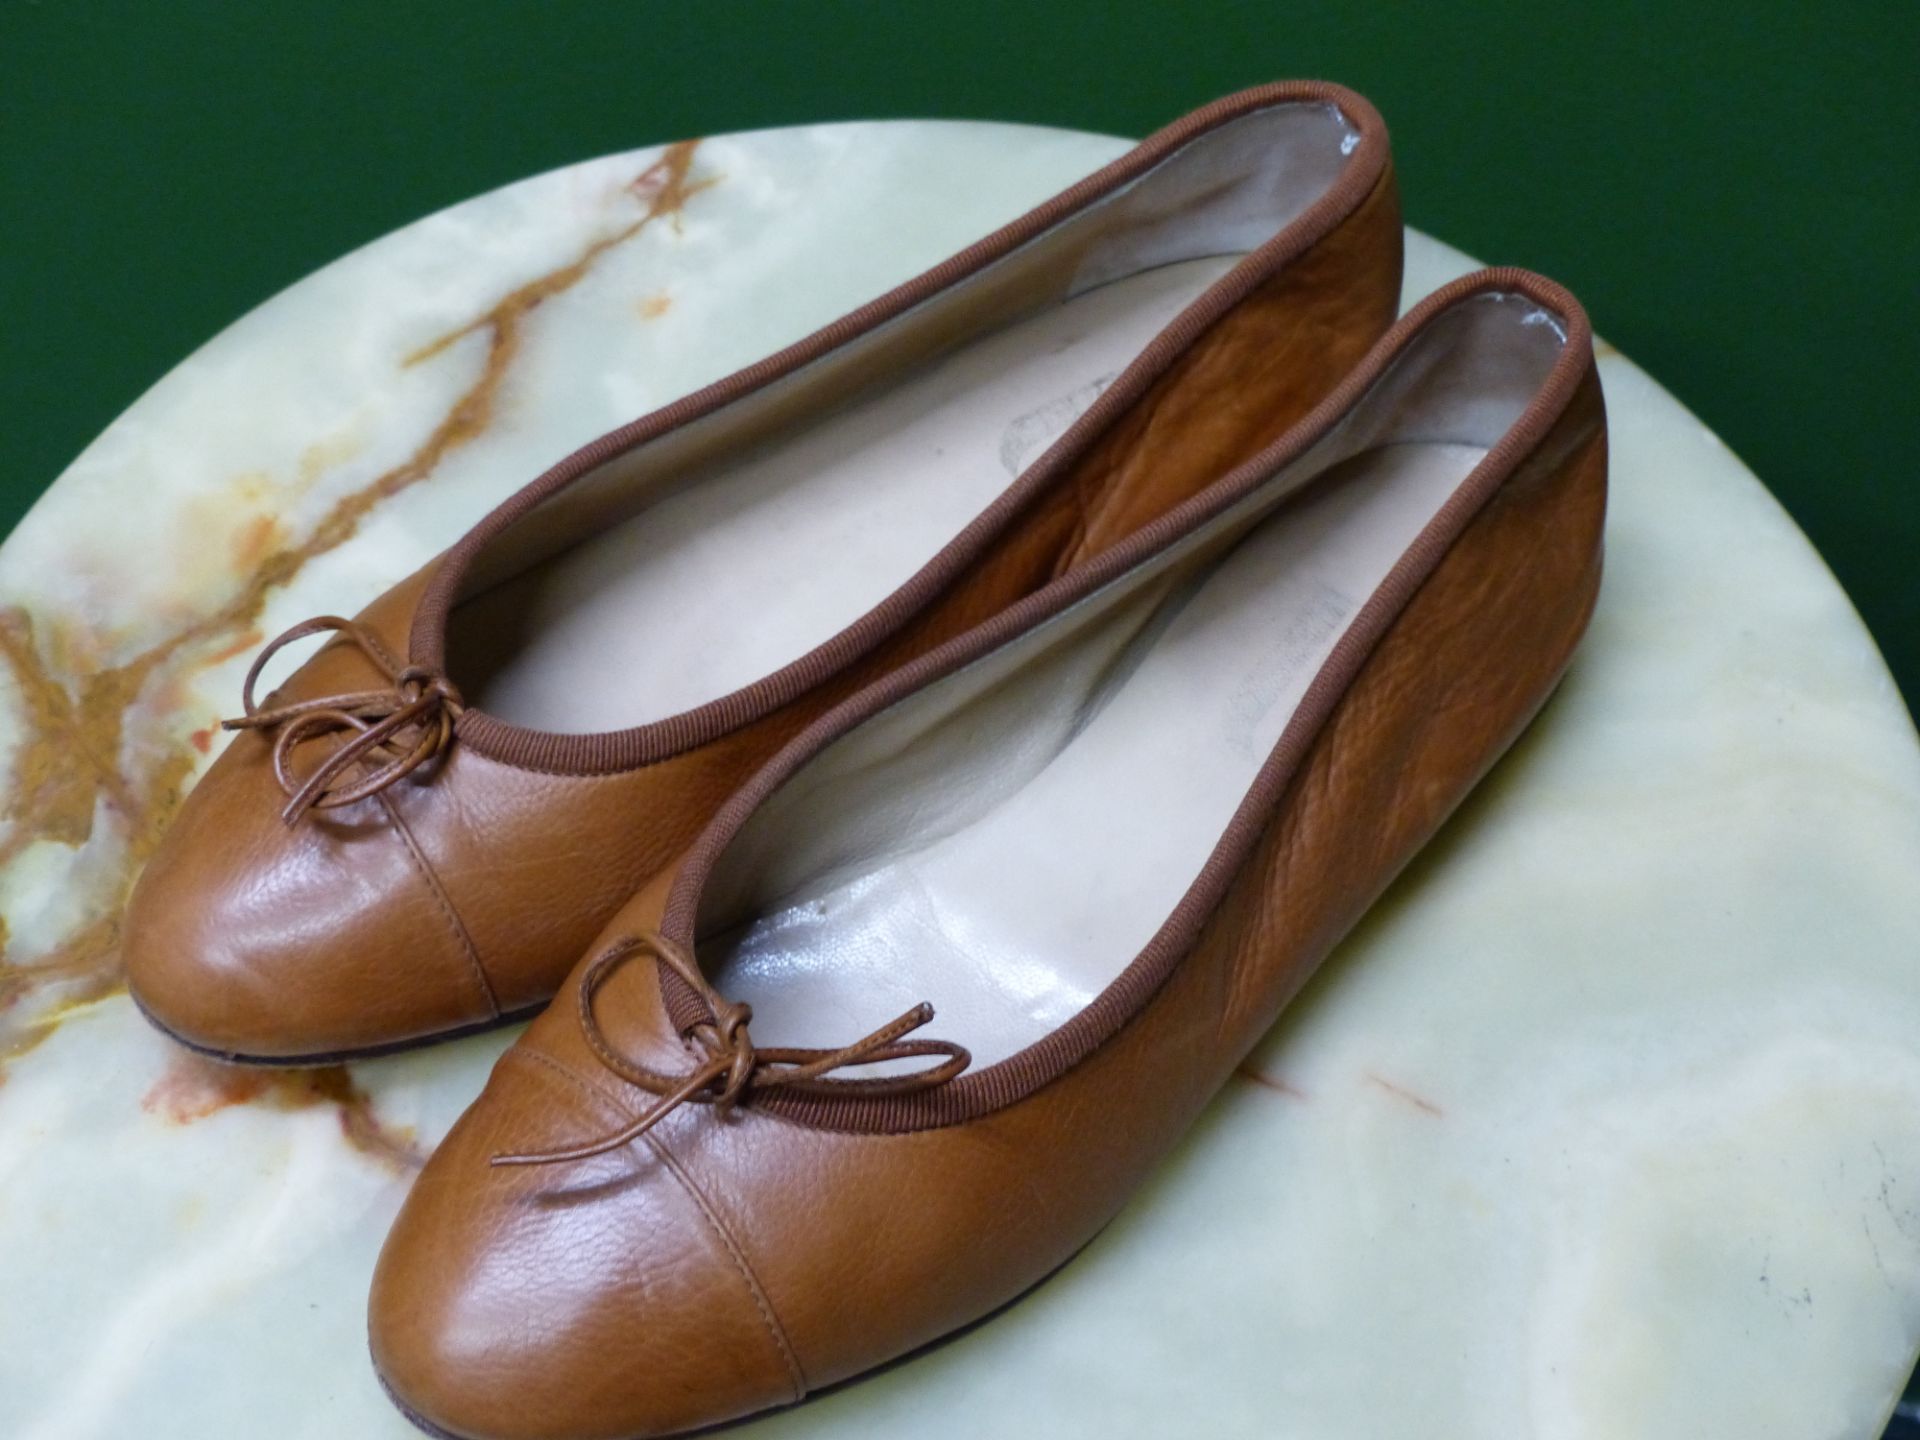 SHOES. TANINO CRISCI LEATHER AND SUEDE CAMEL HEALS EUR SIZE 39. UNUTZER LEATHER BROWN FLATS EUR SIZE - Image 2 of 8